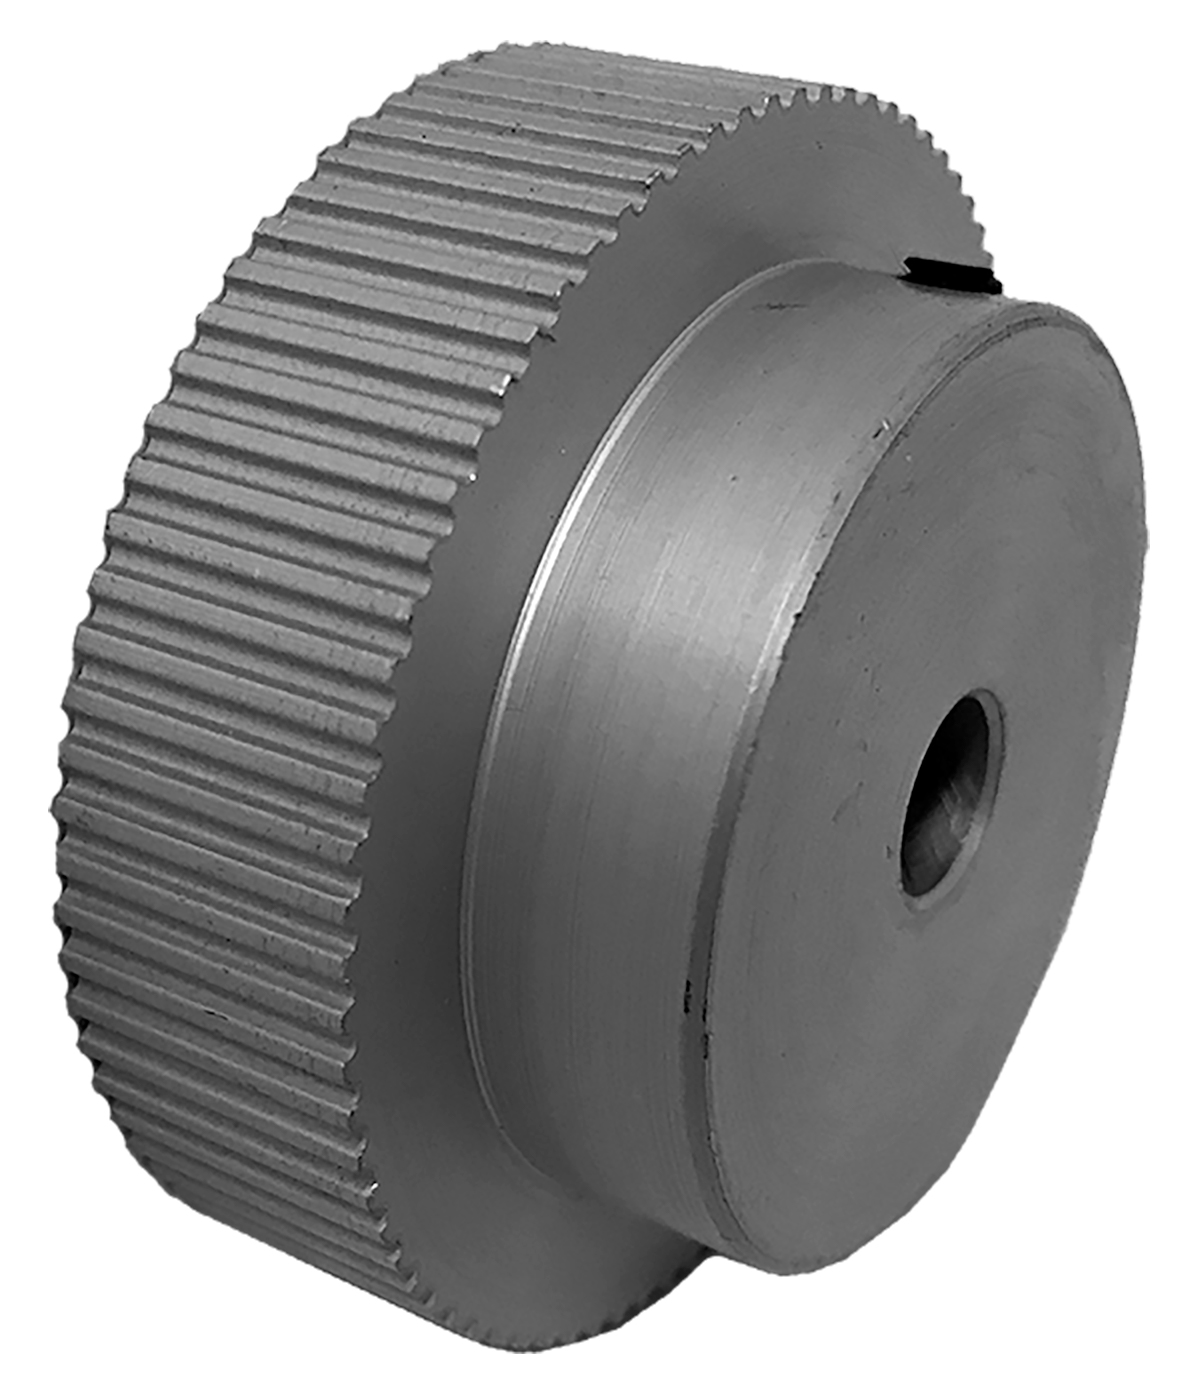 80MP037-6A4 - Aluminum Imperial Pitch Pulleys